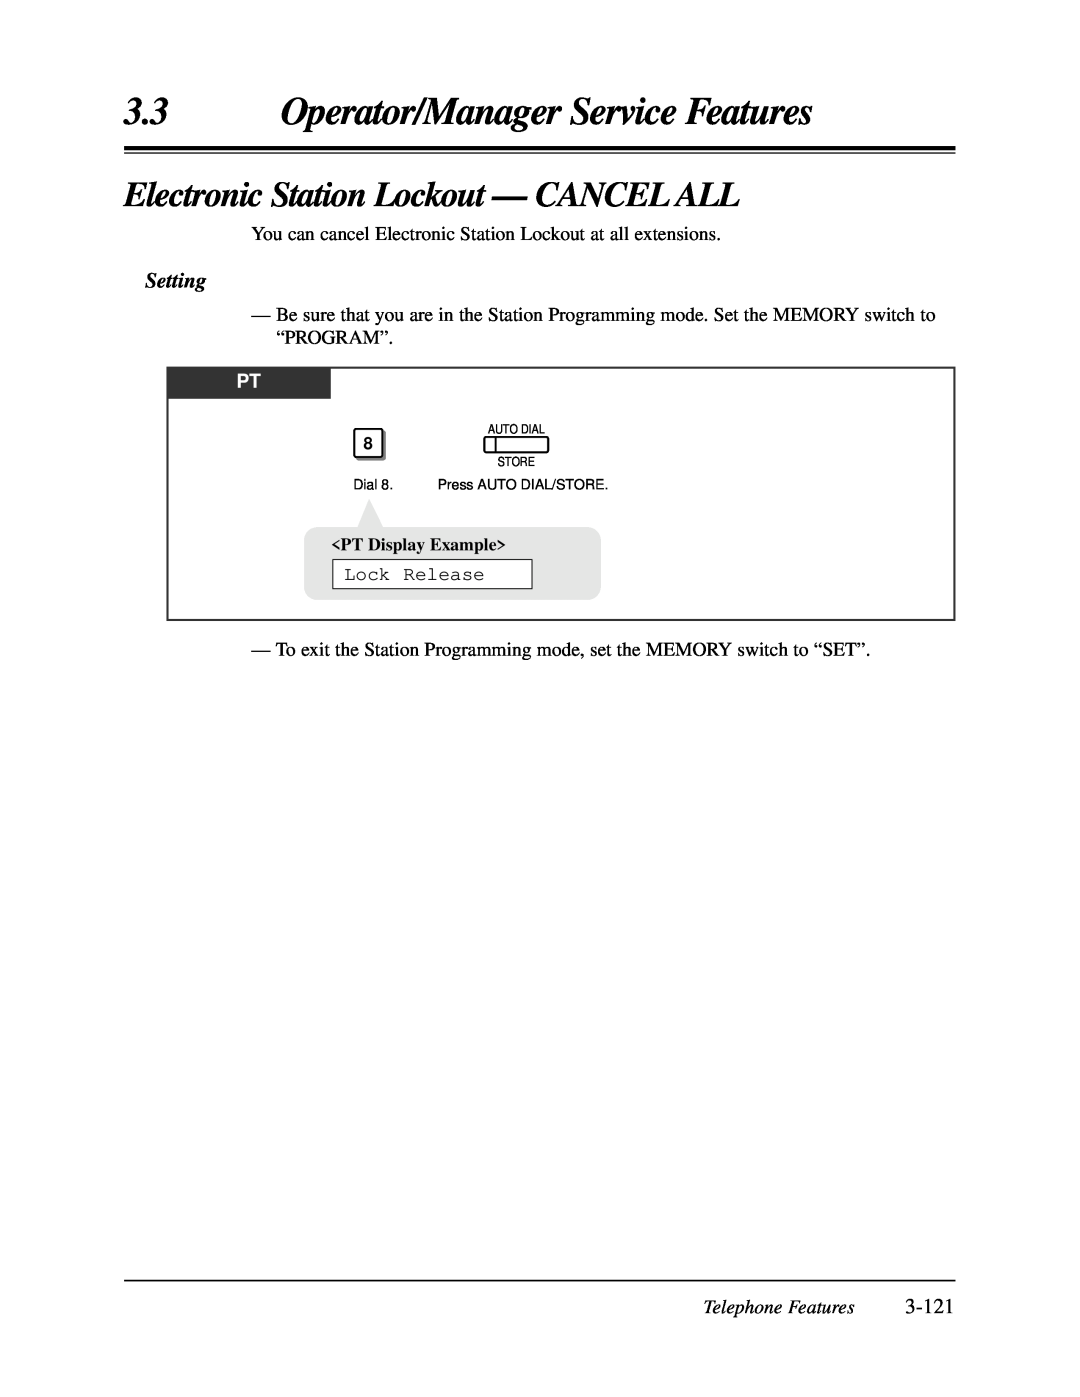 Panasonic KX-TA624 user manual Electronic Station Lockout — CANCEL ALL, 3-121, Operator/Manager Service Features, Setting 